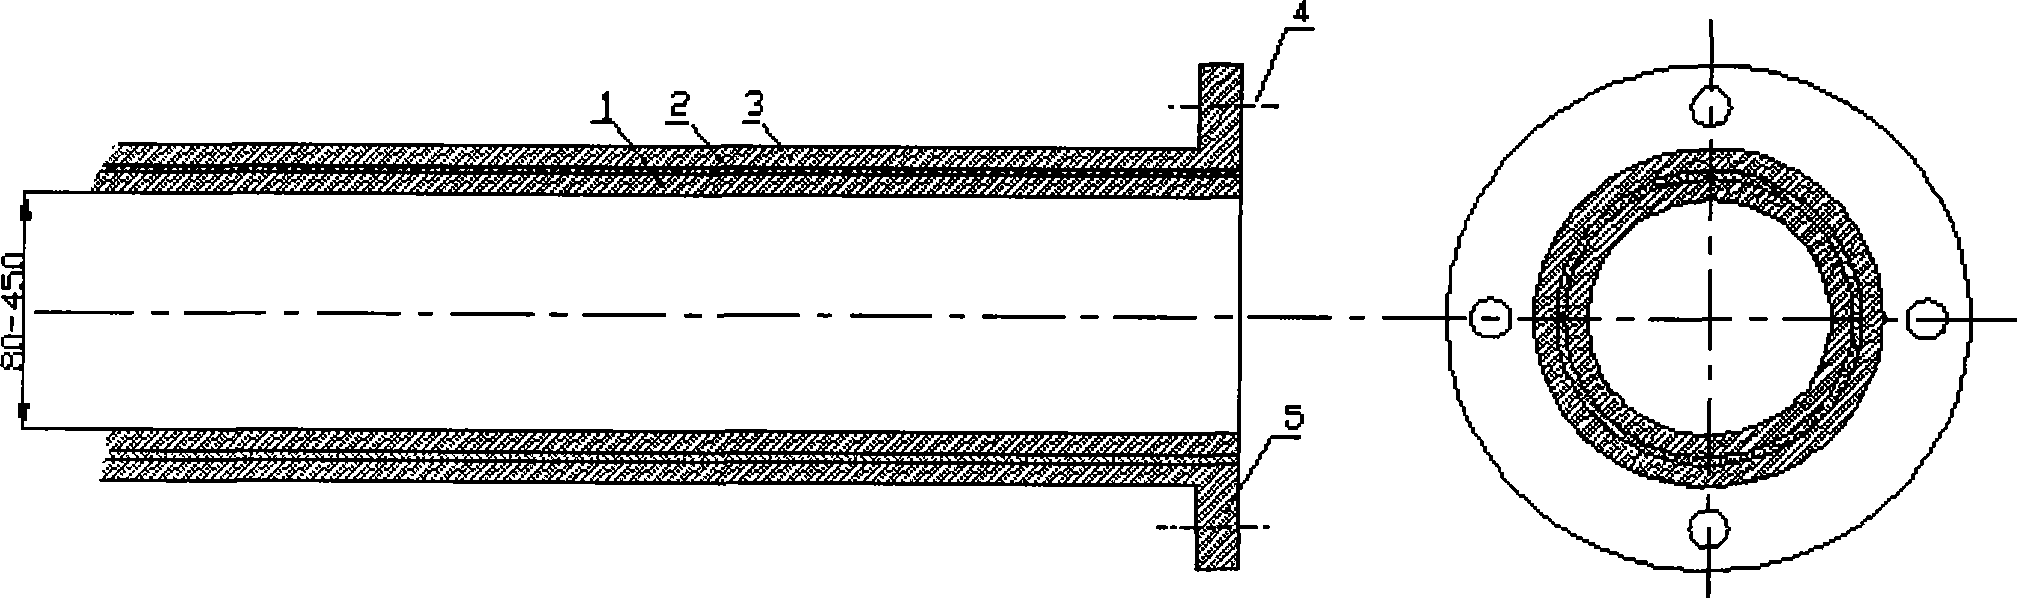 Ceramic composite pipe for conveying flue gas desulfurization glue size in electric power plant and method for manufacturing same